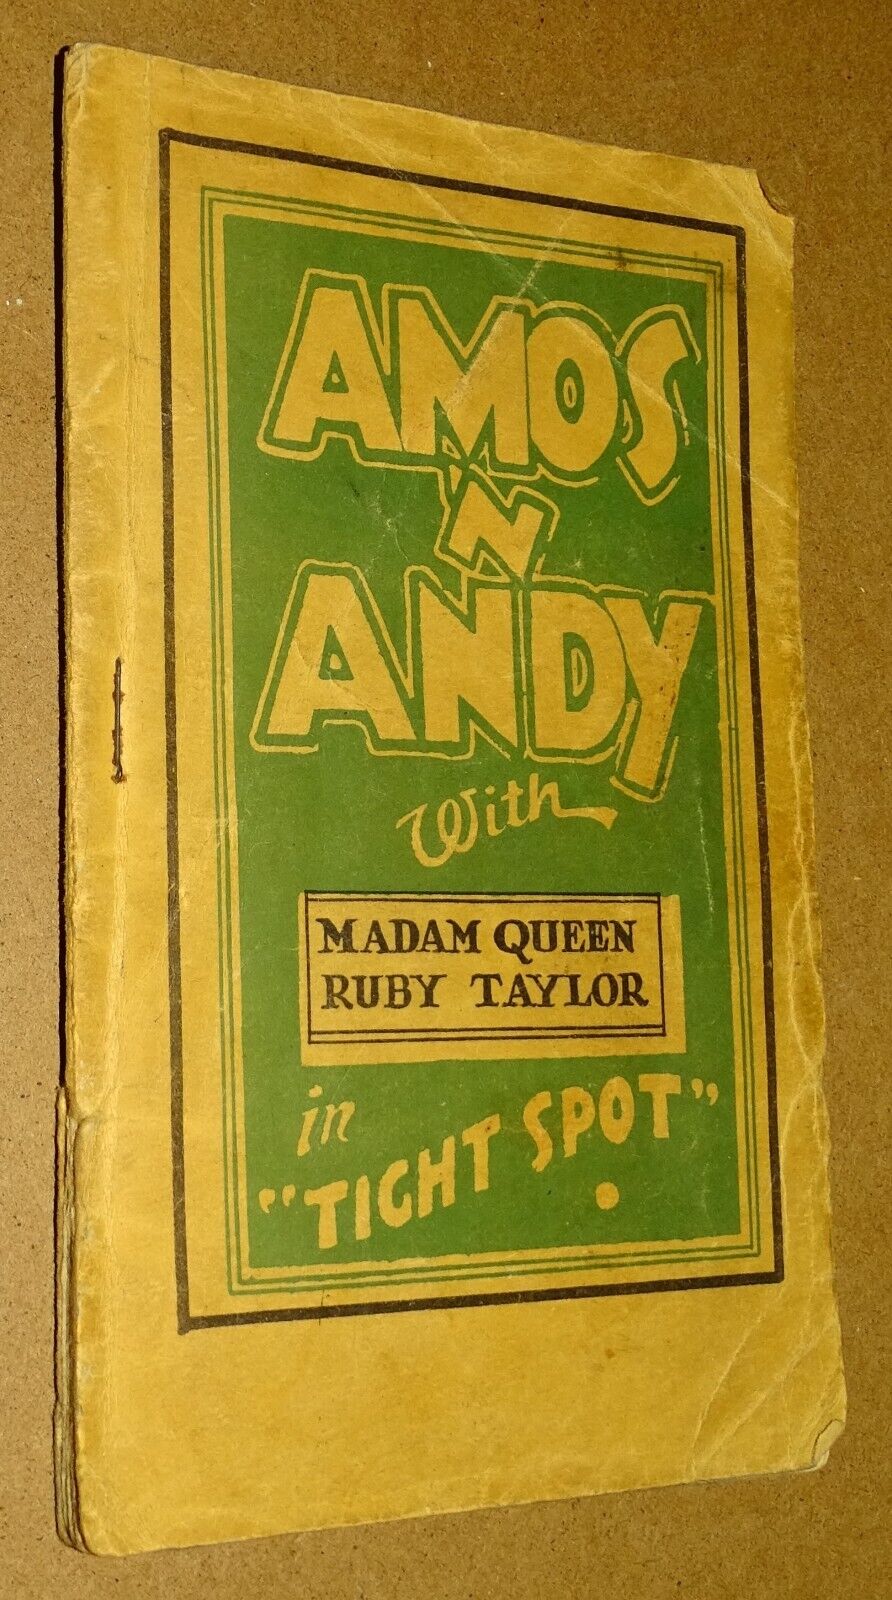 circa early 1930s Naughty Mini Comic AMOS 'N ANDY with Madam Queen Ruby Taylor